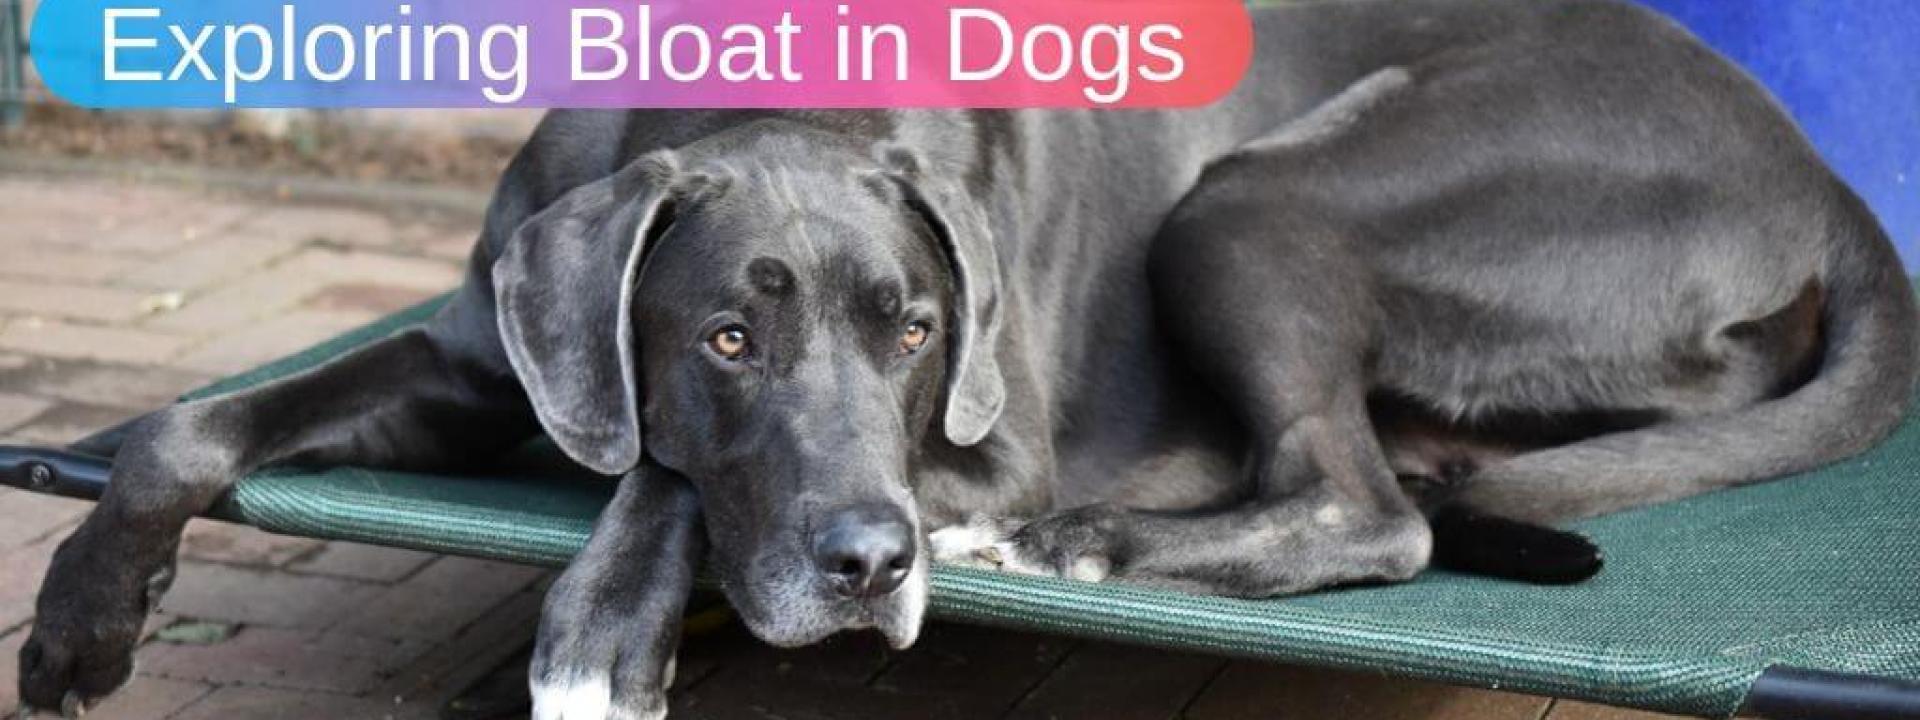 can a dog burp if they have bloat